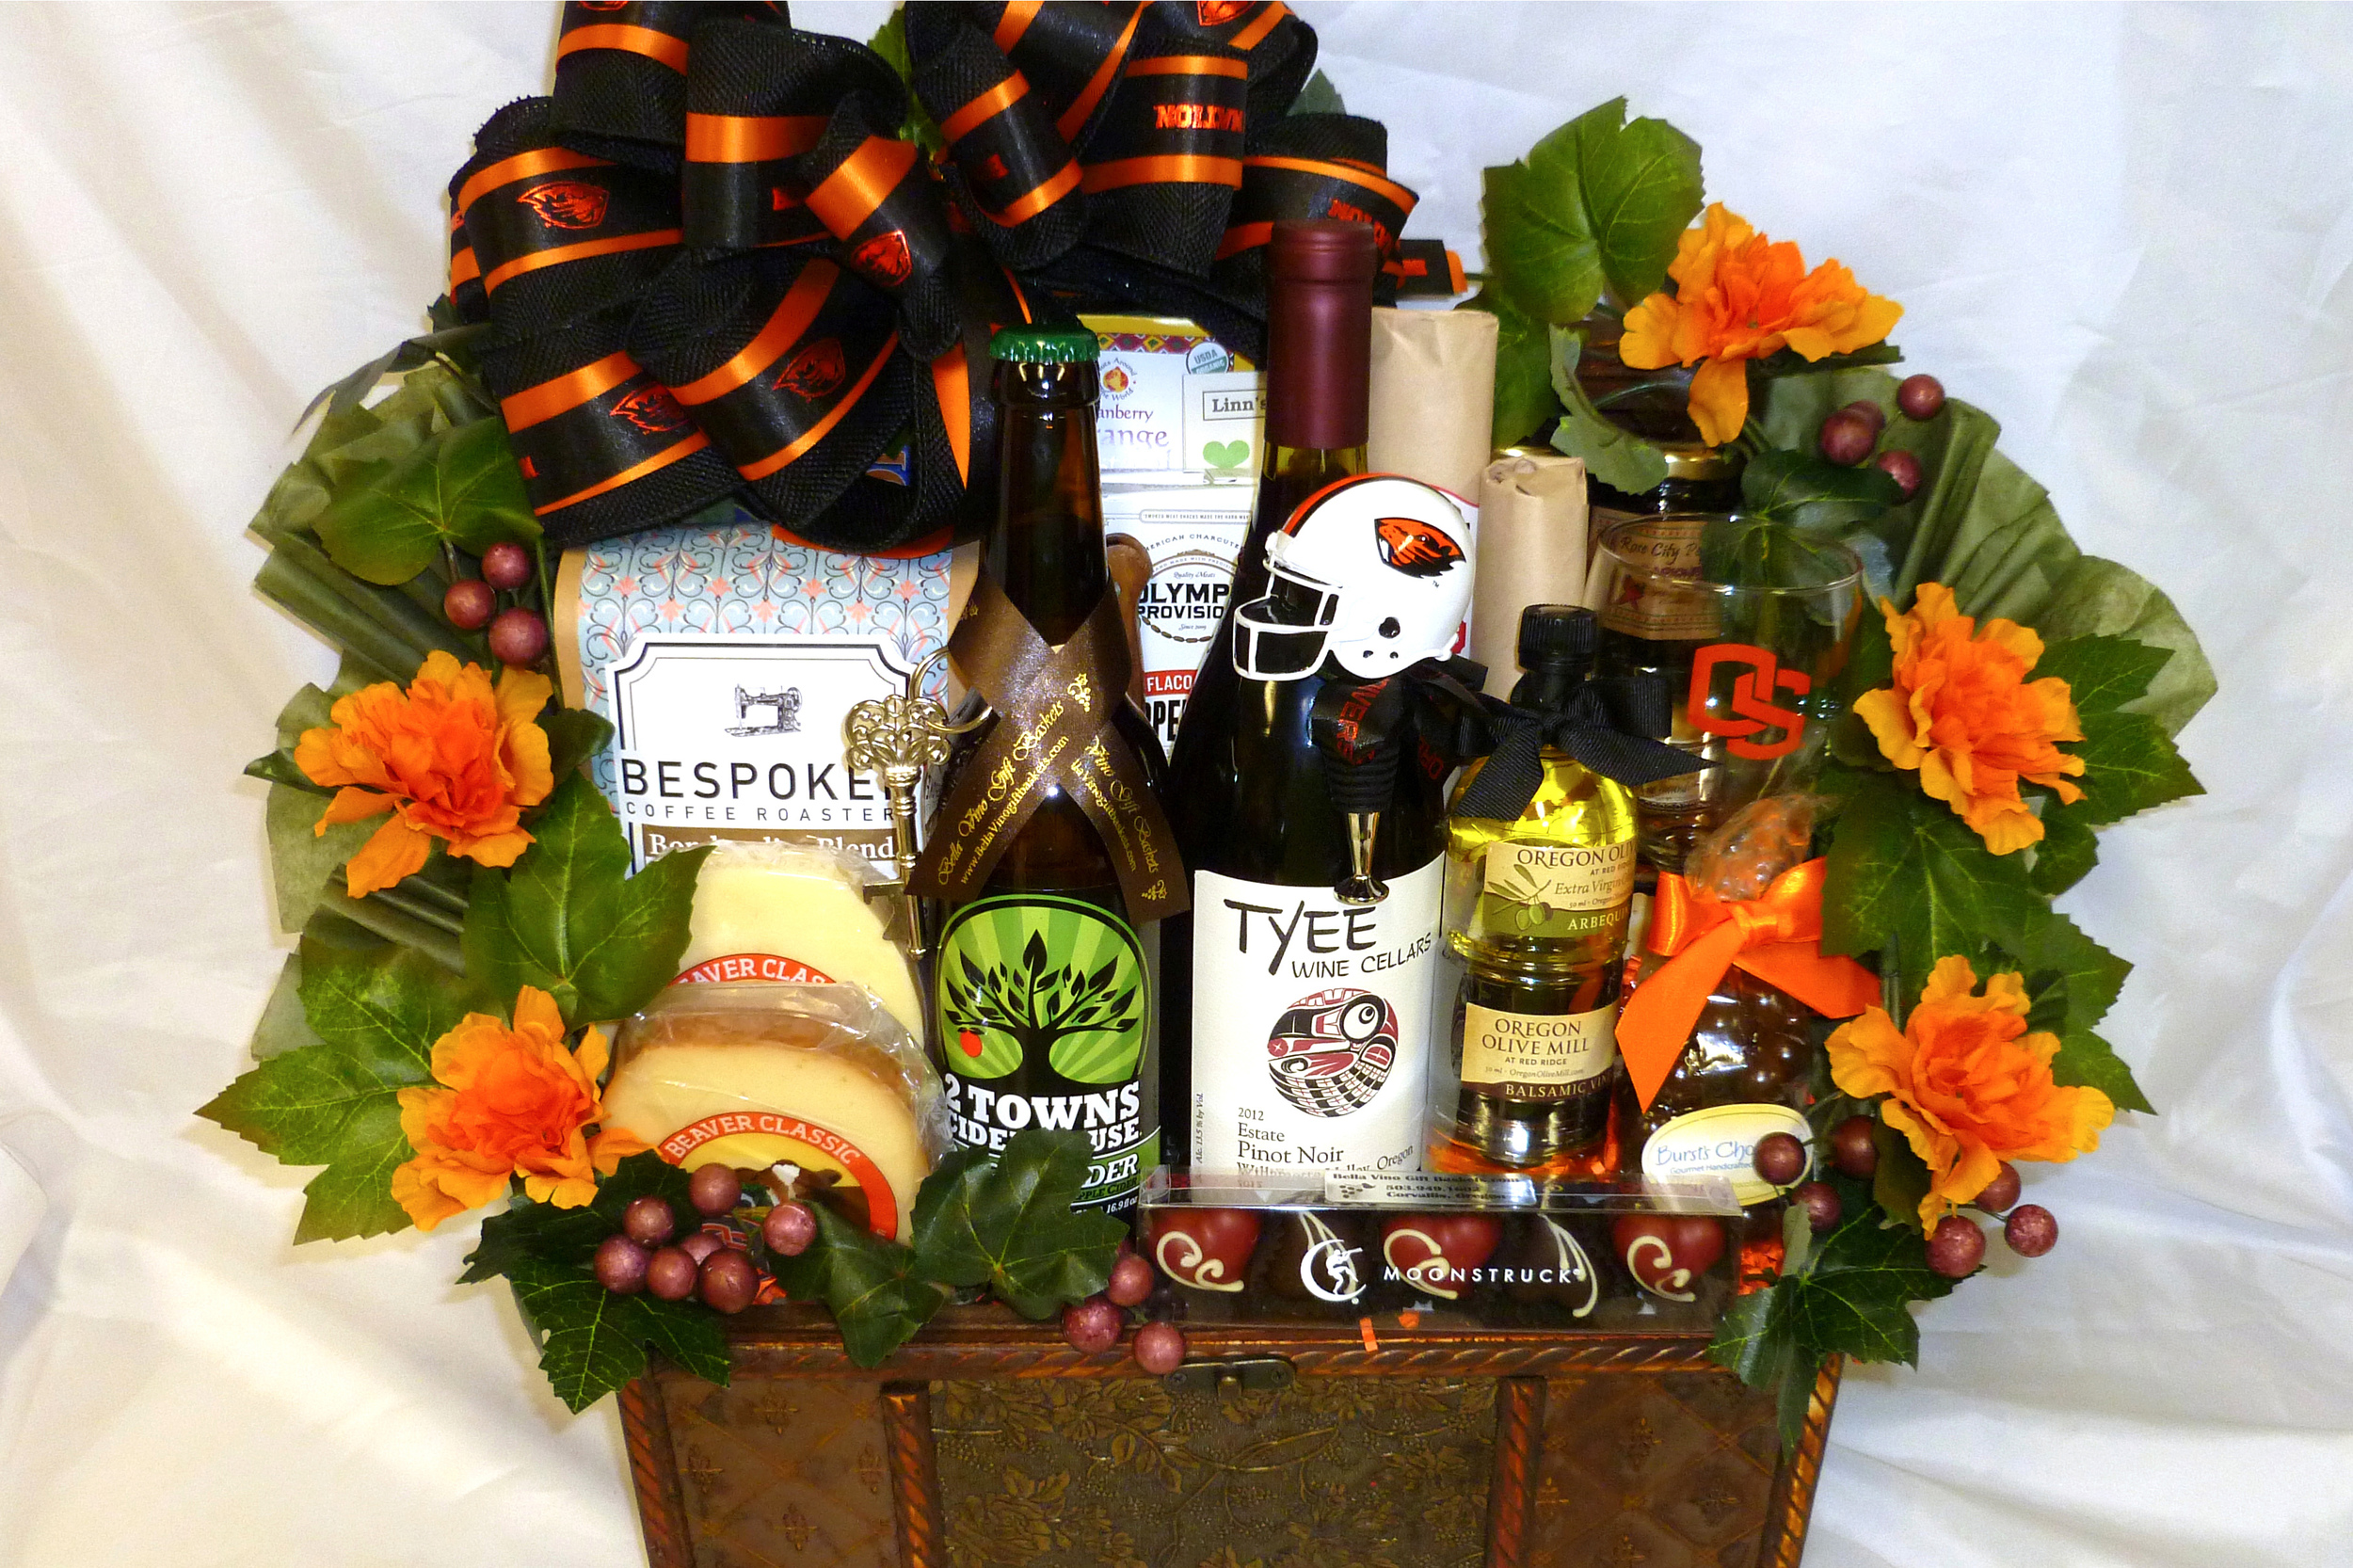 This OSU-themed basket was created by Leigh for a special event at OSU.